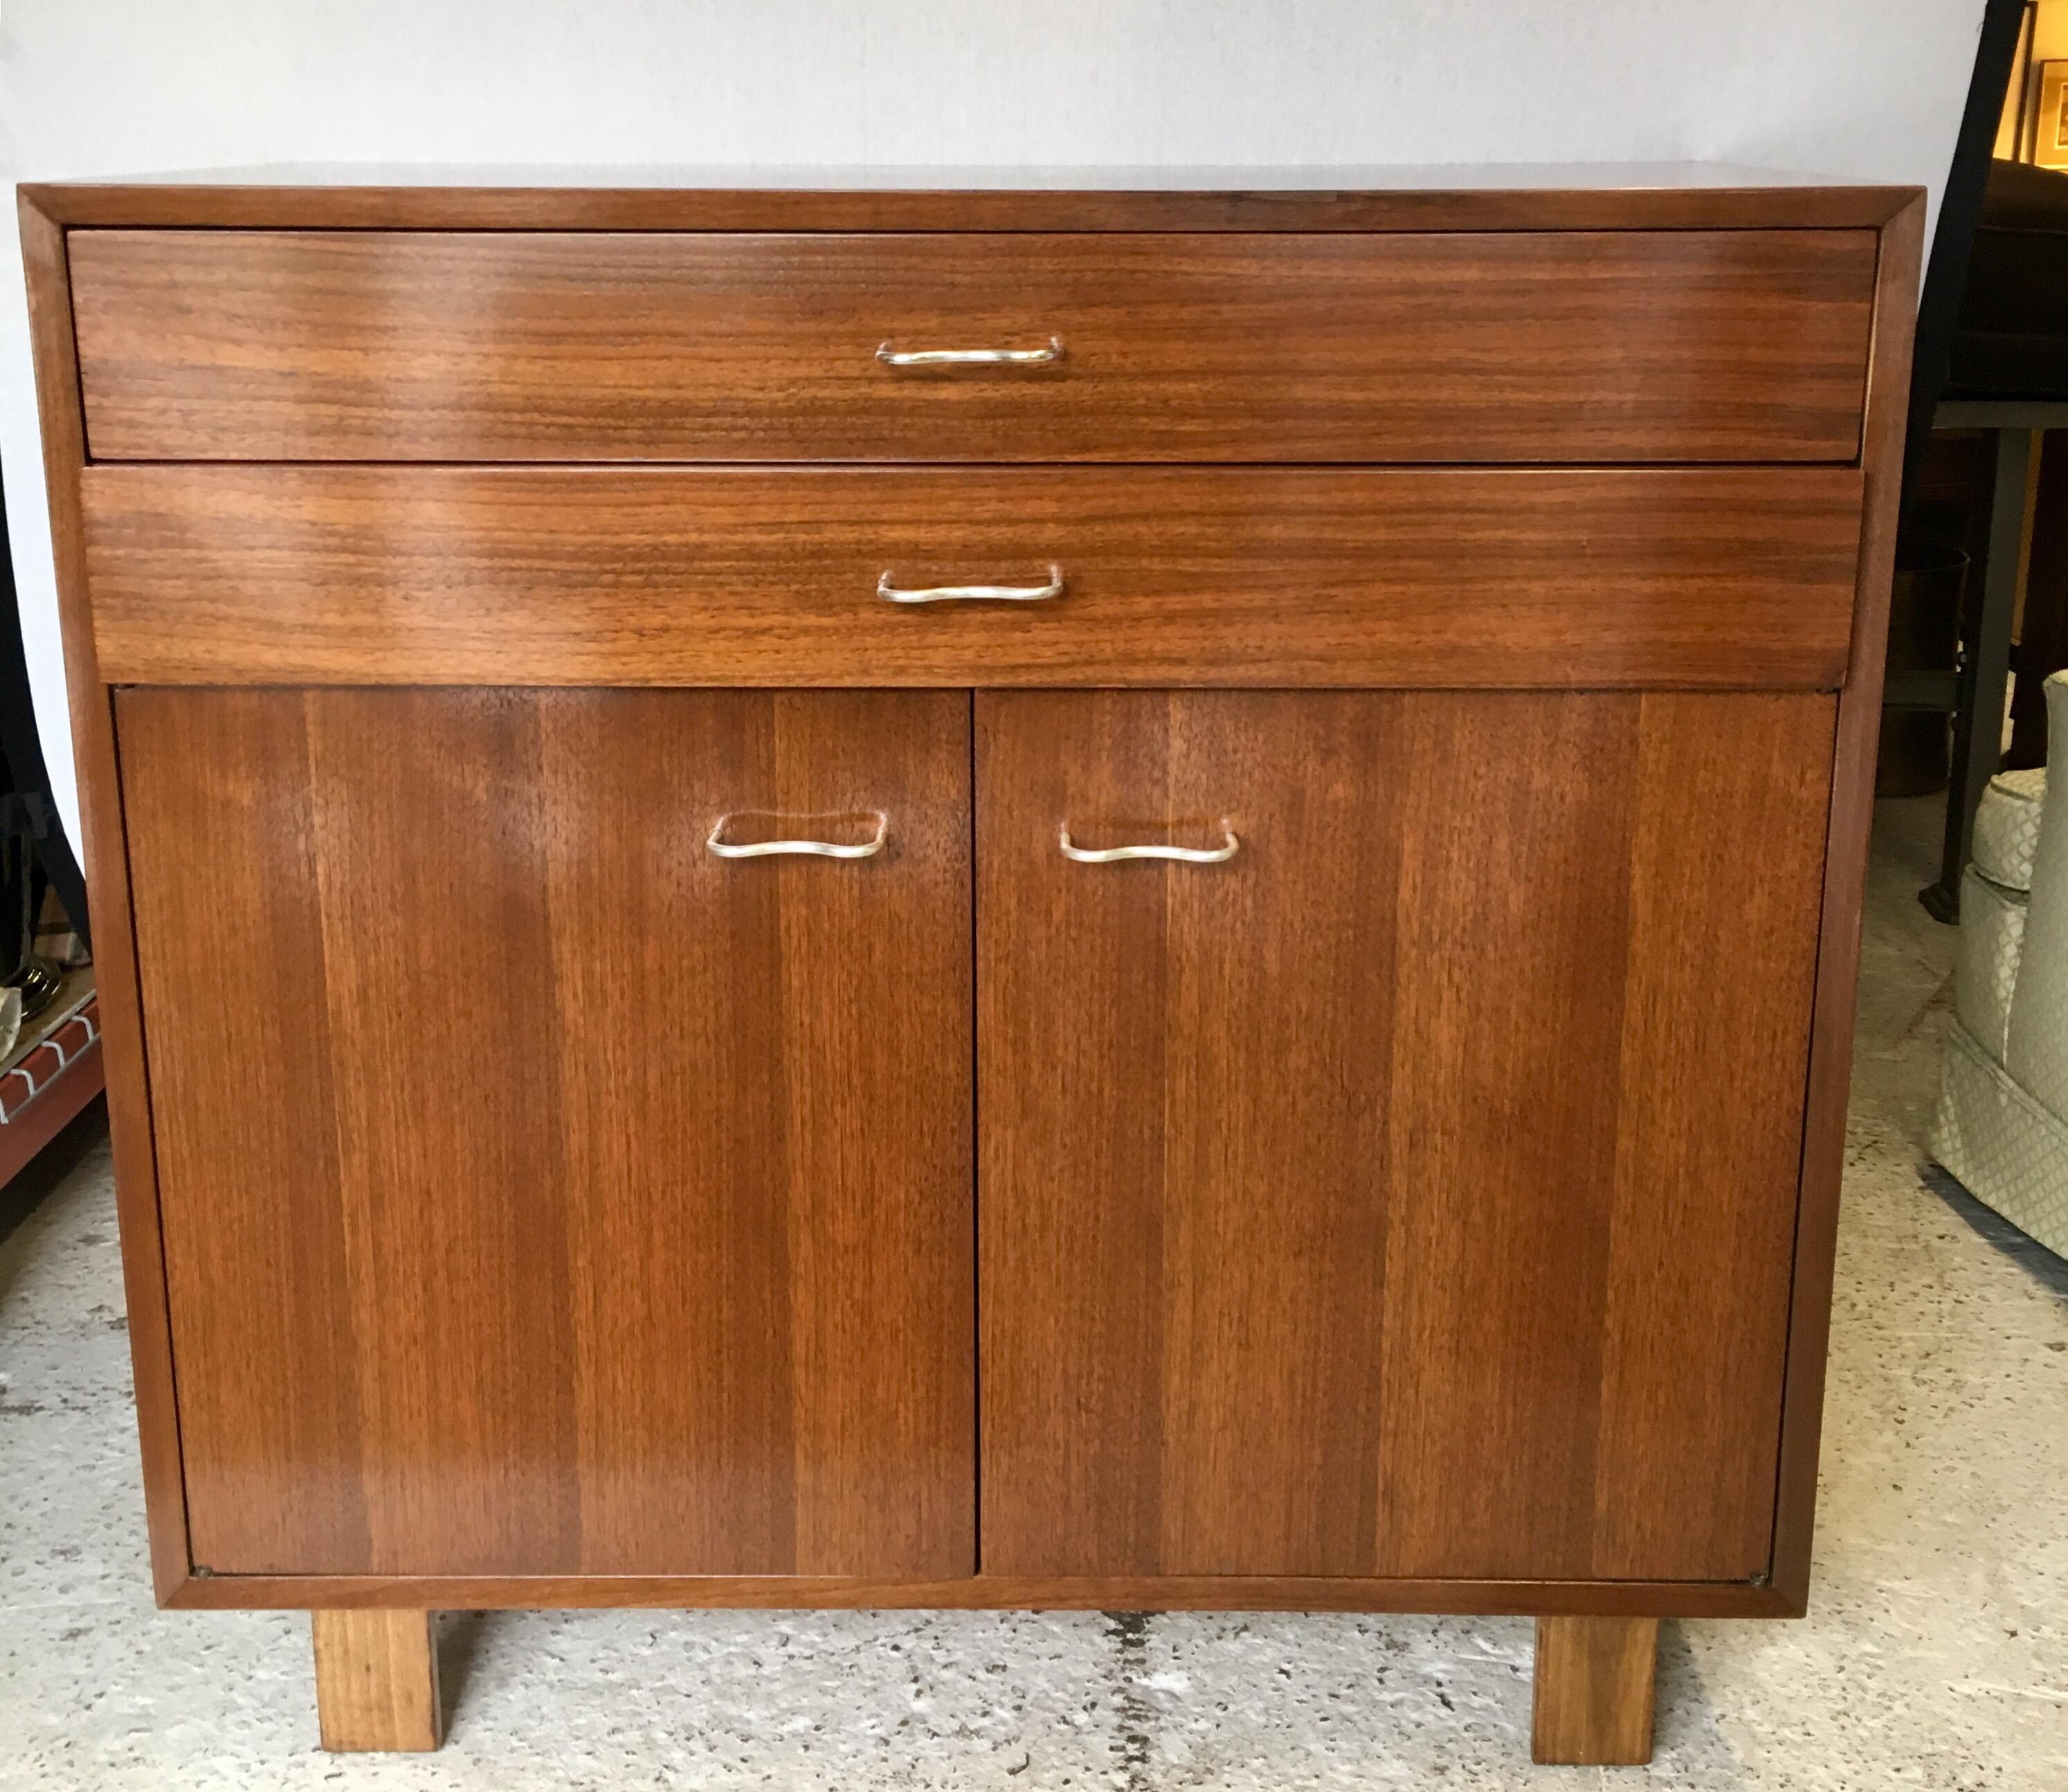 Rare George Nelson designed classic for Herman Miller, circa 1952. Features the original, coveted squiggly hardware. One of three case pieces of this set that we are selling this week exclusively on our 1stdibs platform.